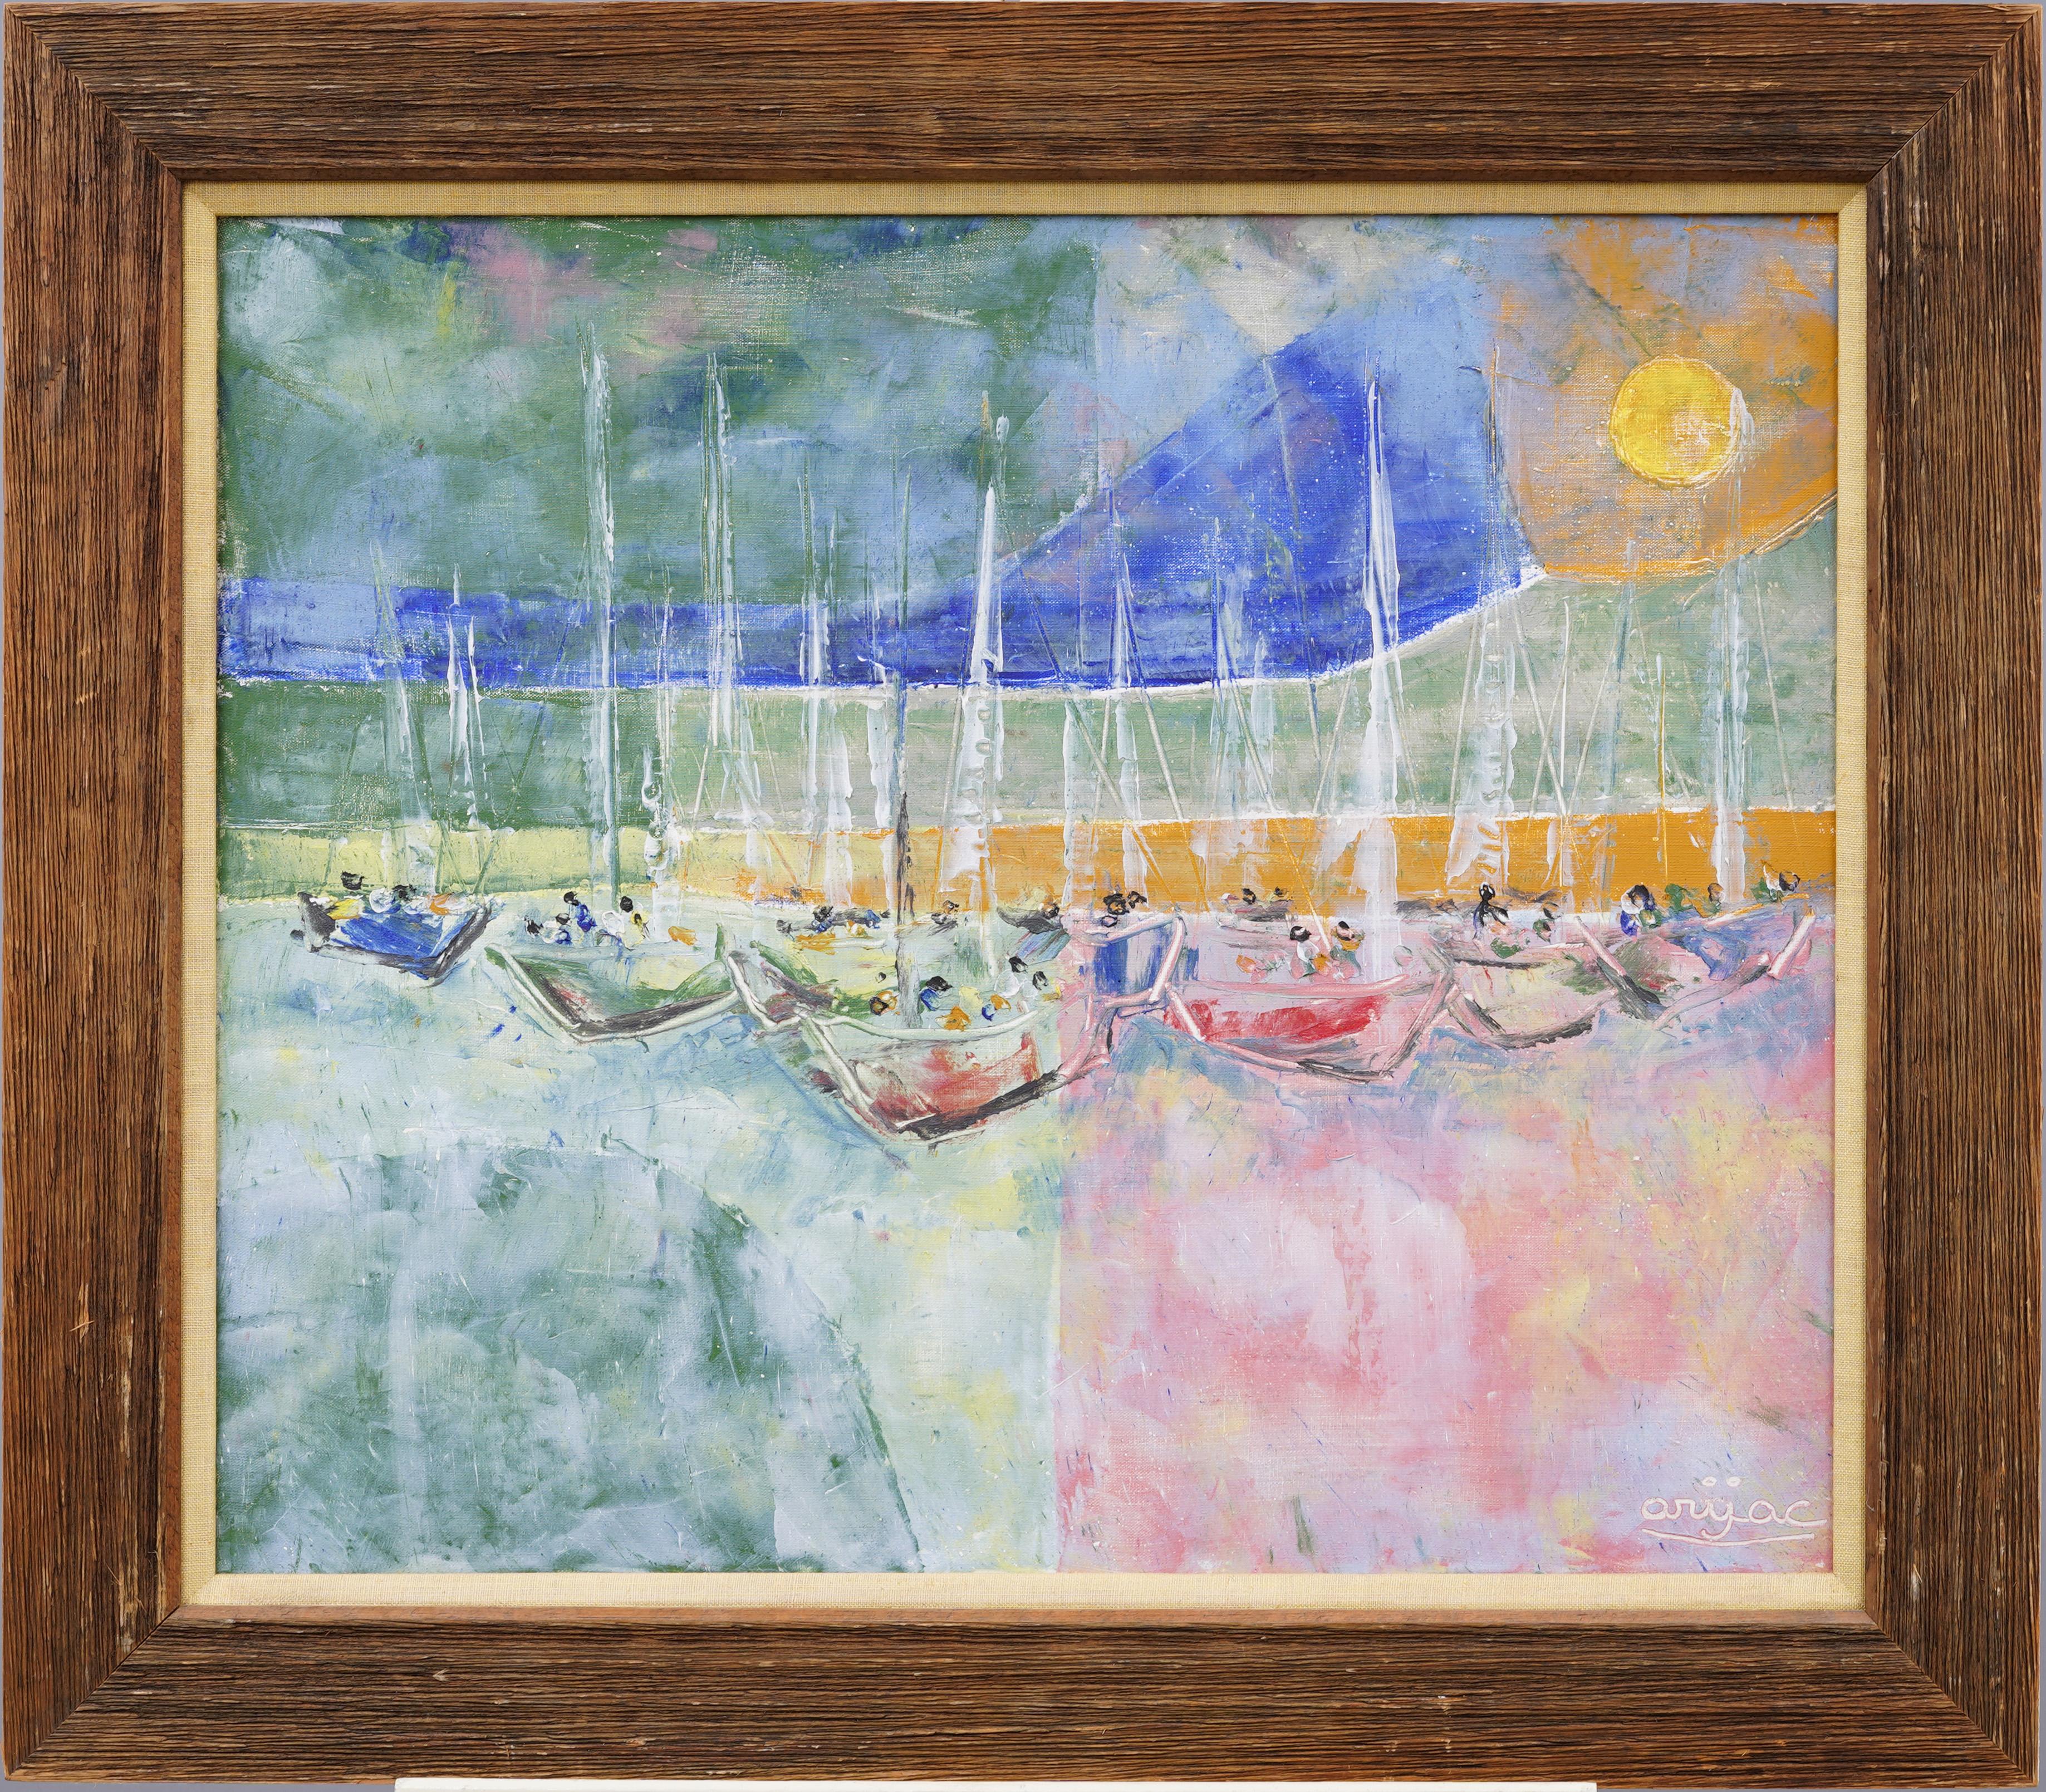 Nicely painted mid century abstract cubist seascape painting.  Oil on canvas.   Framed.  Signed.